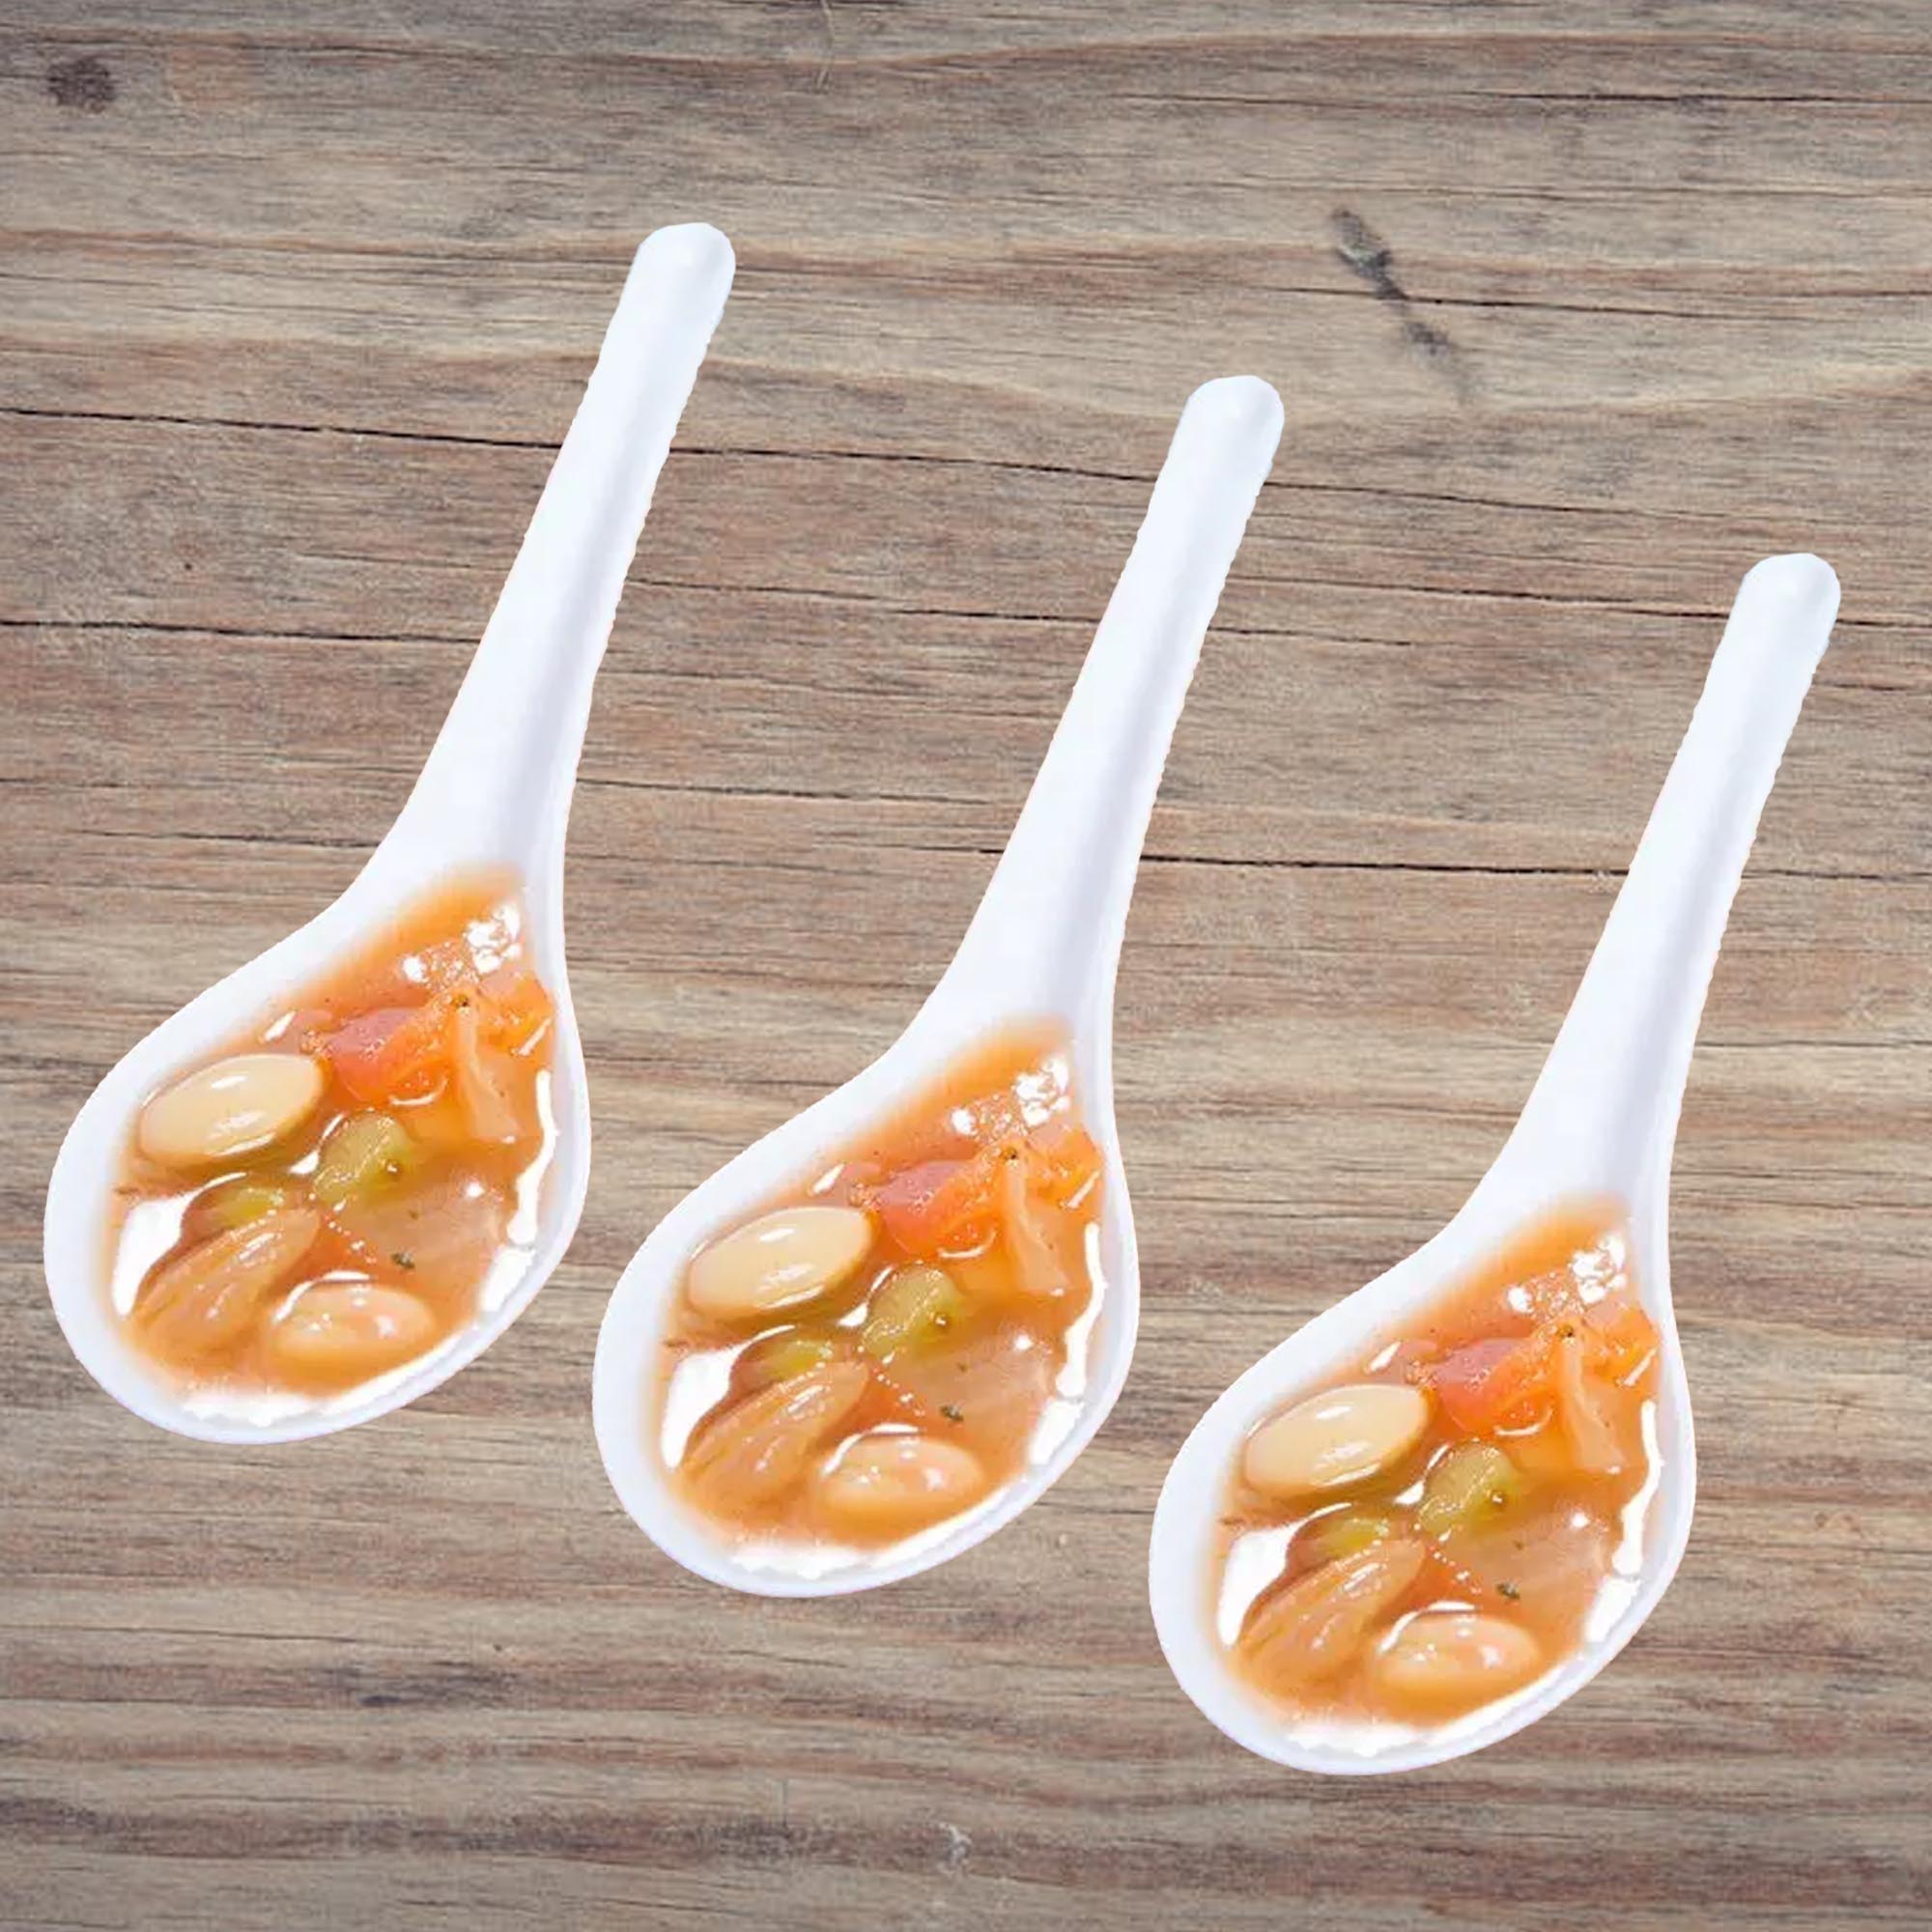 white spoons  spoon  soup spoon  Restaurant Supplies  Ramen Spoon  Plastic Spoons  plastic spoon  household diner restaurant food truck fast food  disposable spoon  Disposable Cutlery  dining spoon  Catering Restaurant Cafe Buffet Event Party  affordable bulk economical commercial wholesale